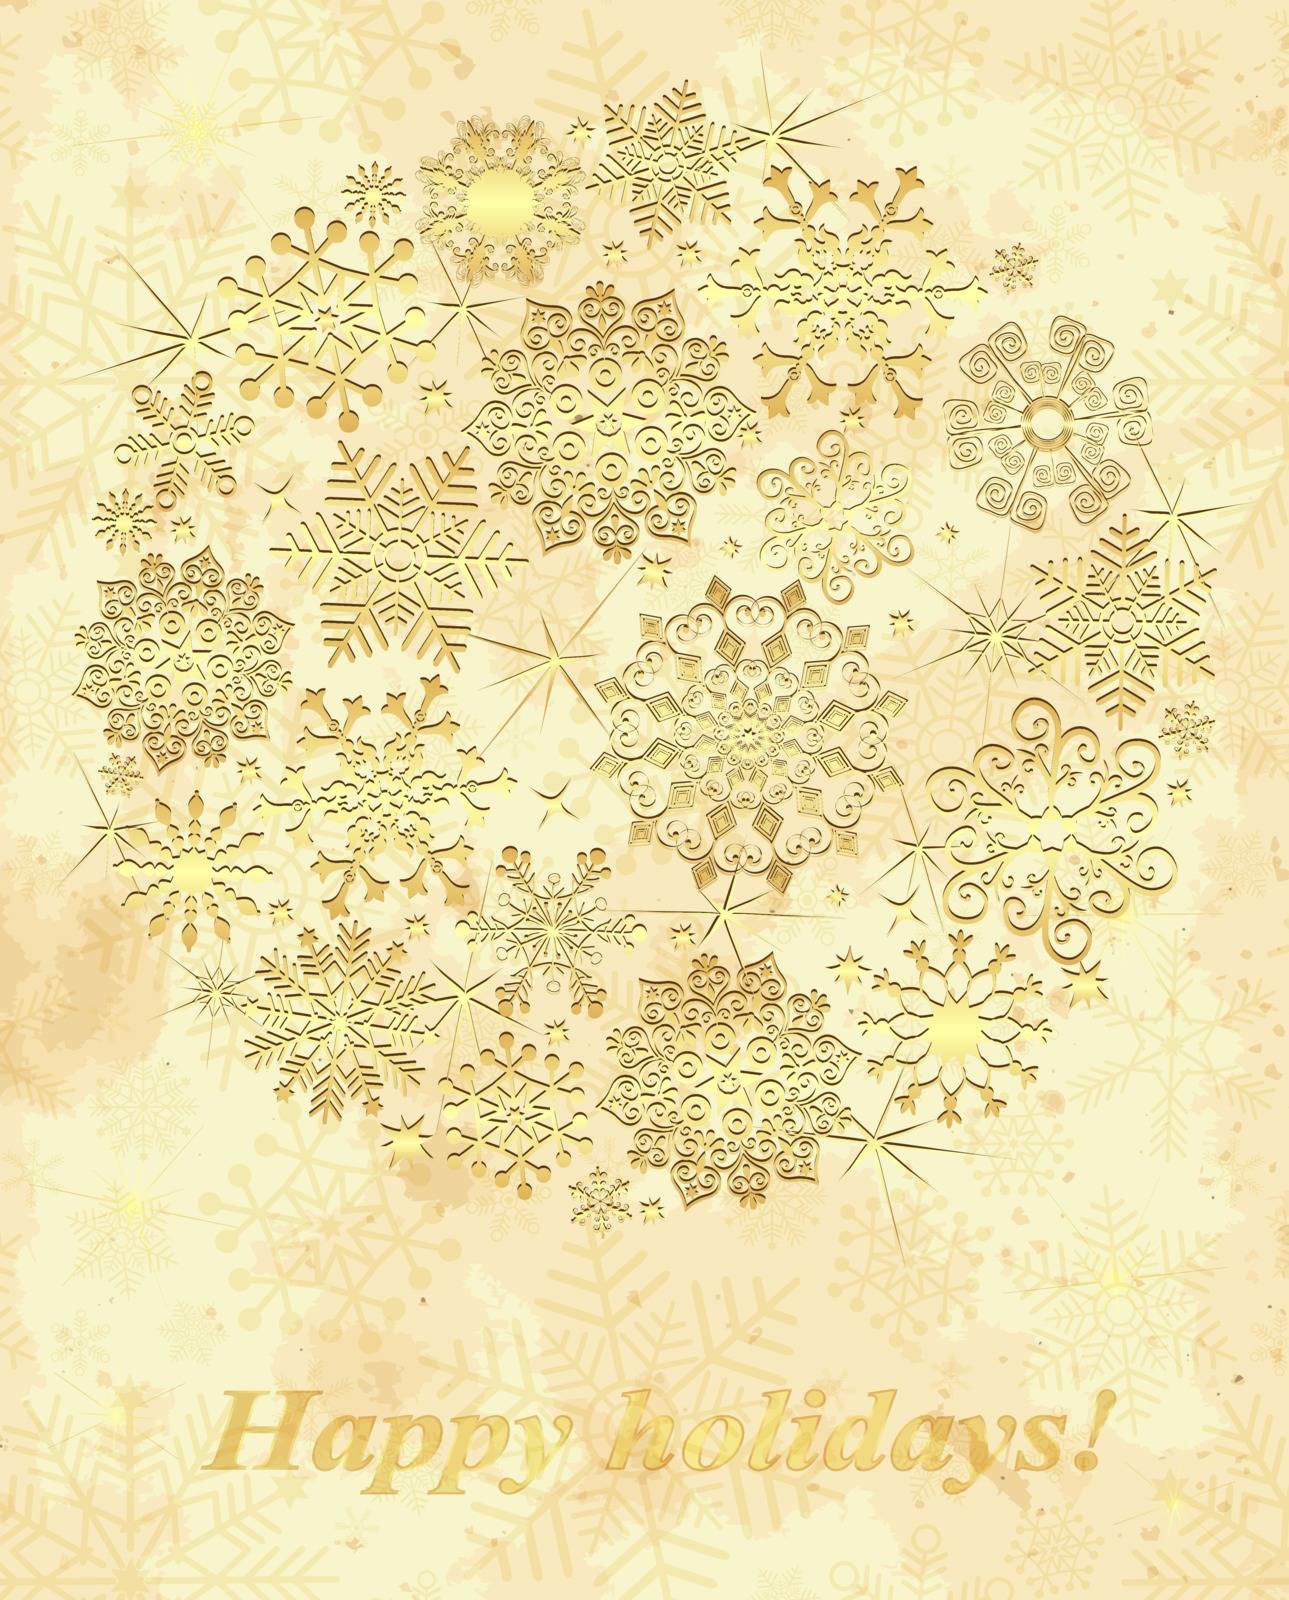 Grungy christmas frame with gold snowflakes (vector eps 10)